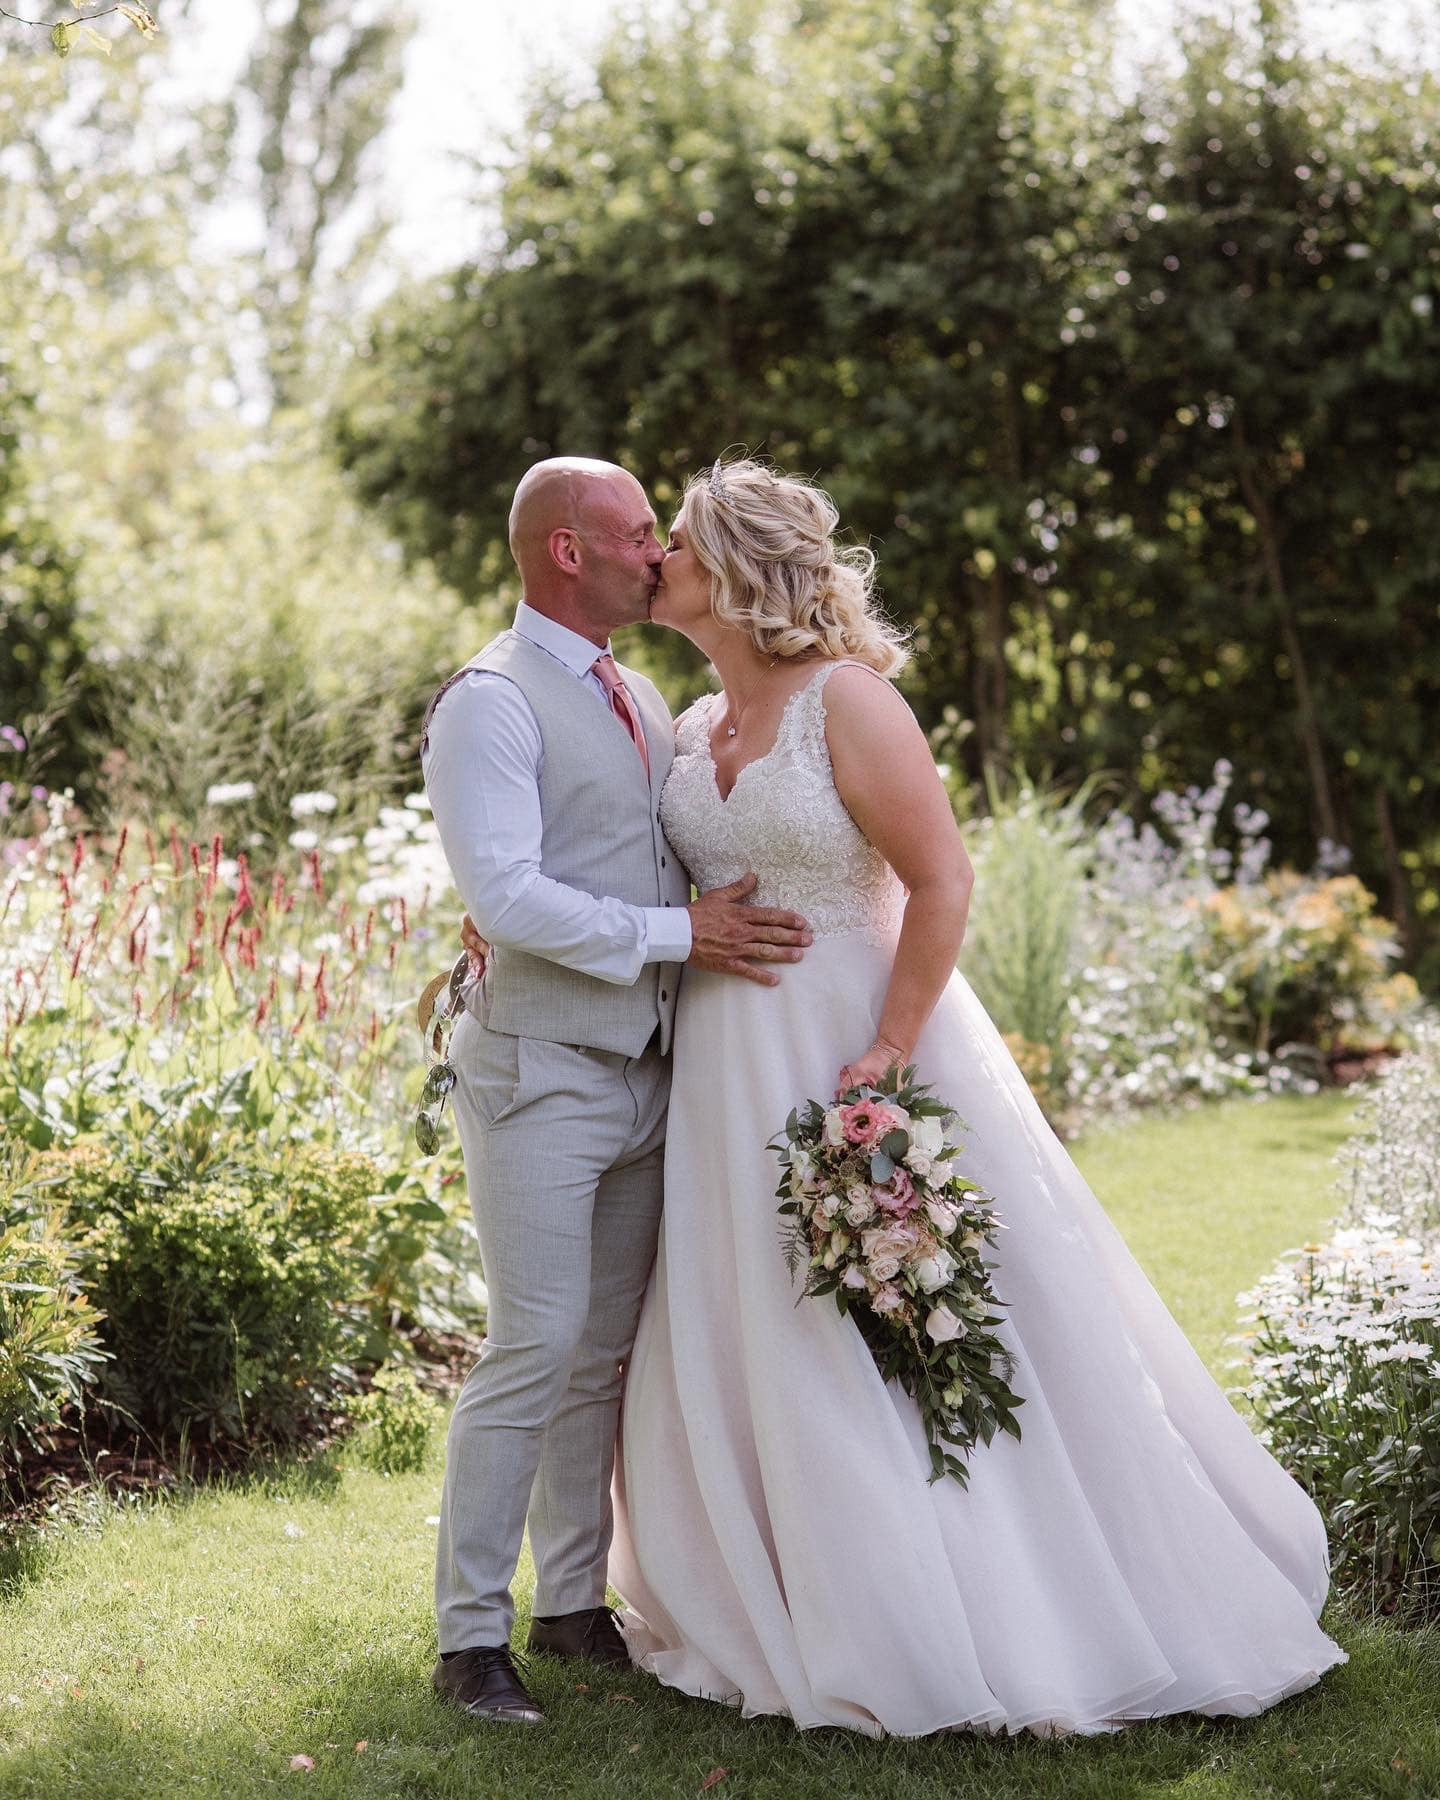 Bride and Groom Just married share a kiss in garden wedding venue 